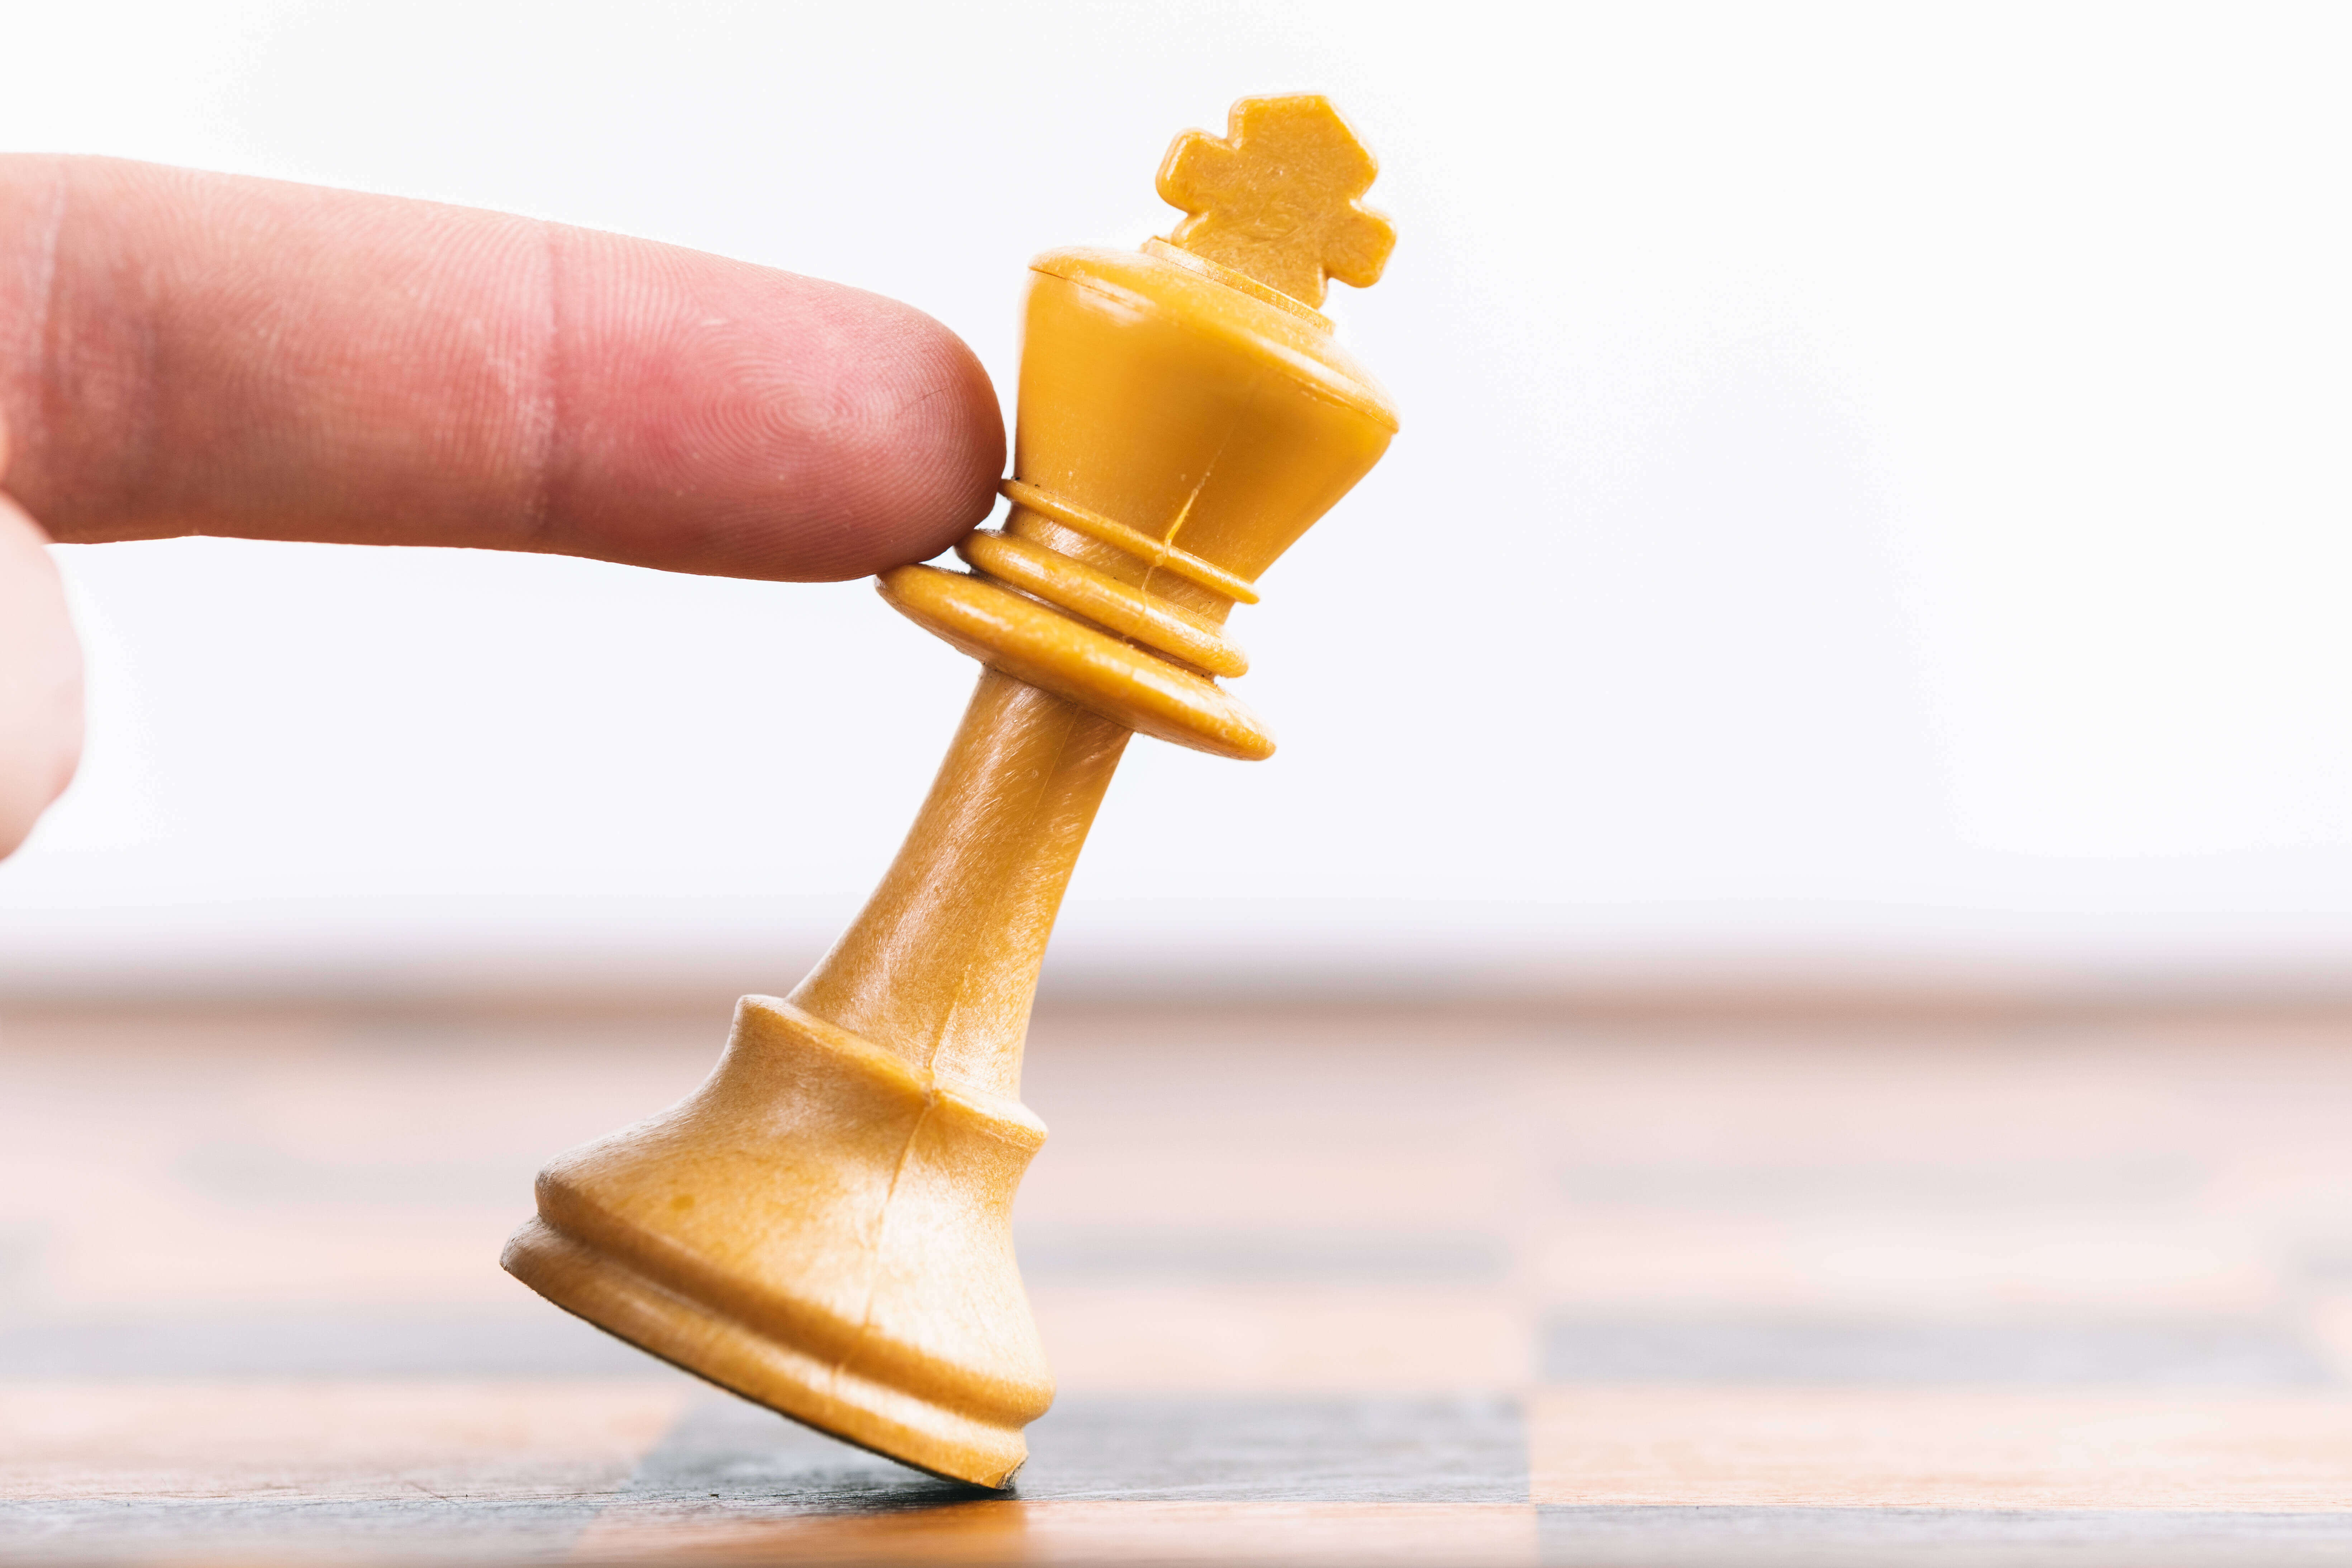 Show your followers when the jig is up and the game is over with photos of a chess piece